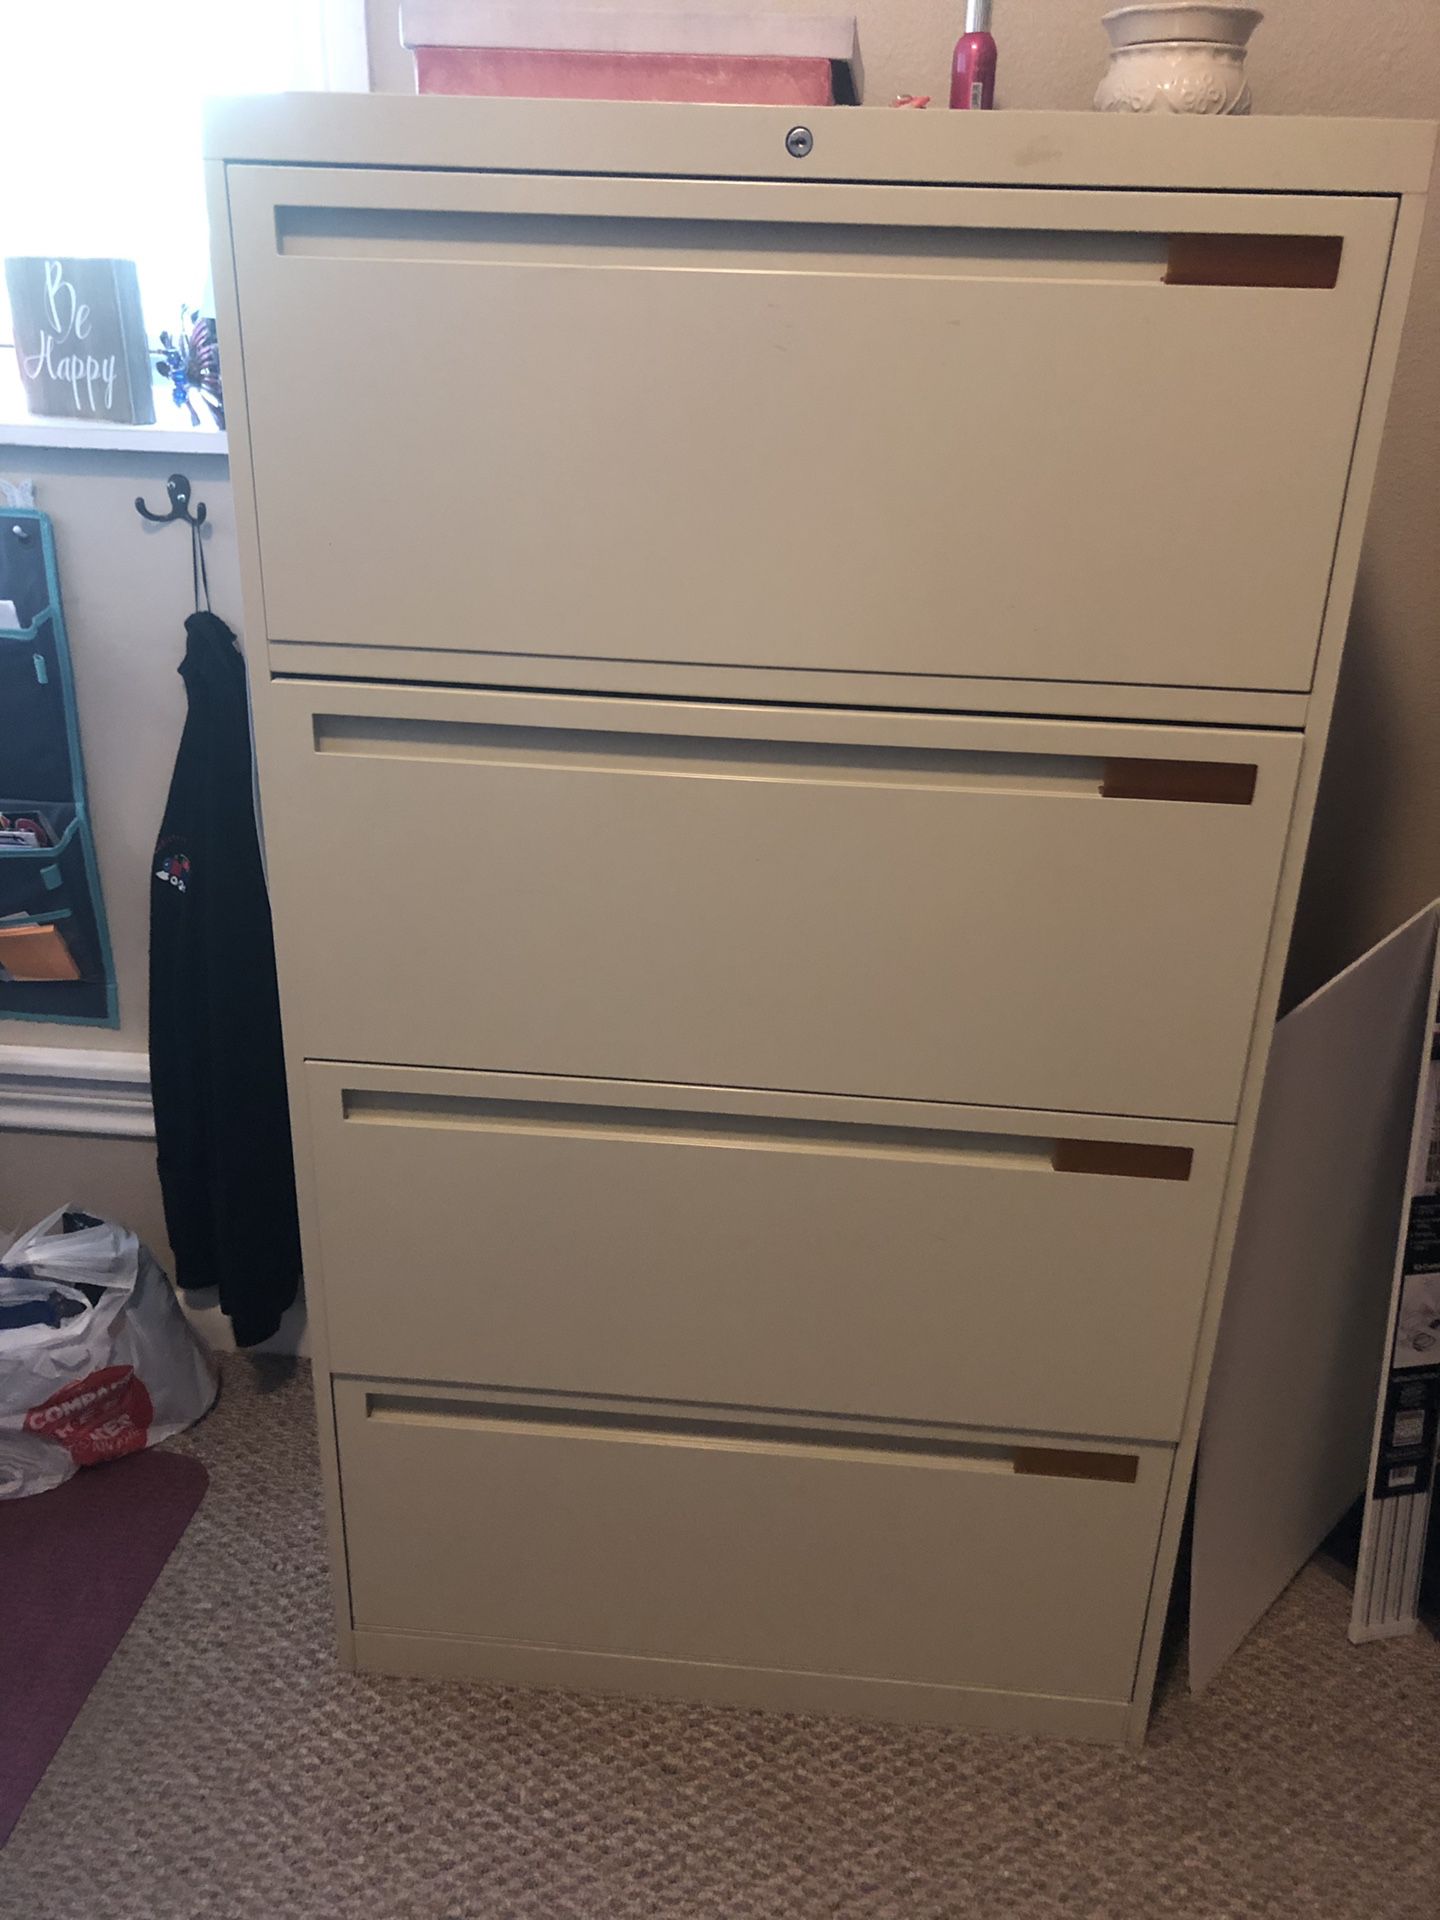 4 DRAWER FILE CABINET - MUST PICK UP BY FRIDAY!! $50 OR OBO